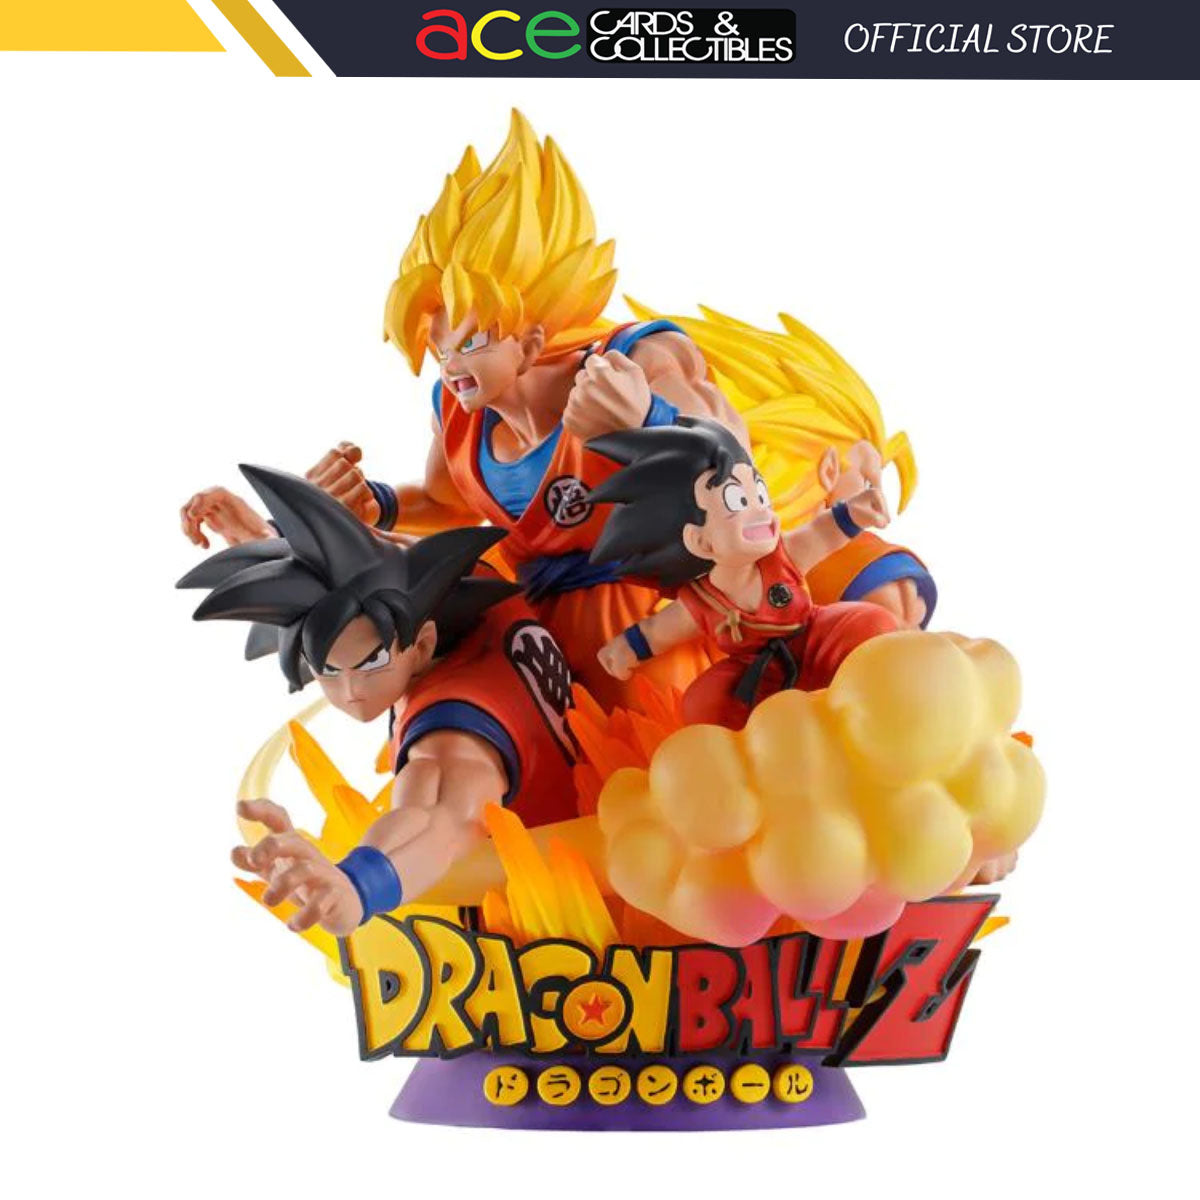 Dragon Ball Z Petitrama DX Series Dracap Re Birth 01-MegaHouse-Ace Cards & Collectibles